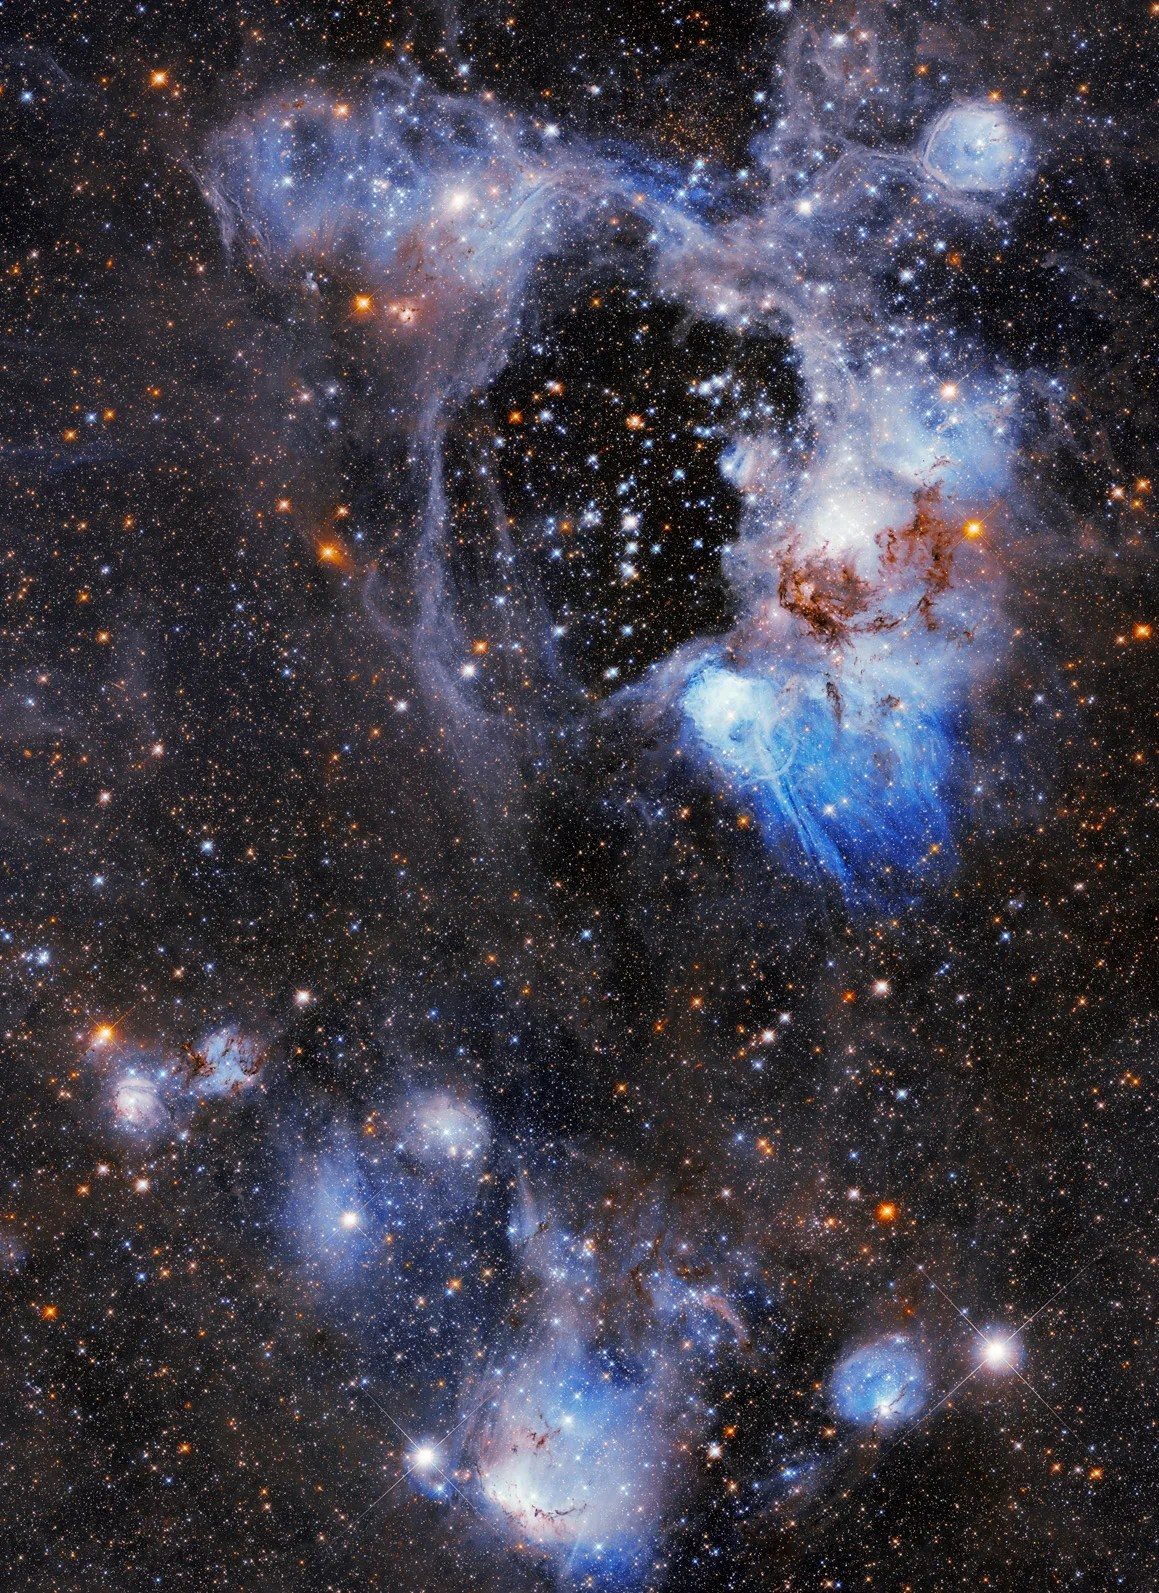 Upper 2/3 holds a bright white and blue gas and dust-cloud ring around a central void or bubble. lower 1/3 holds blue and white